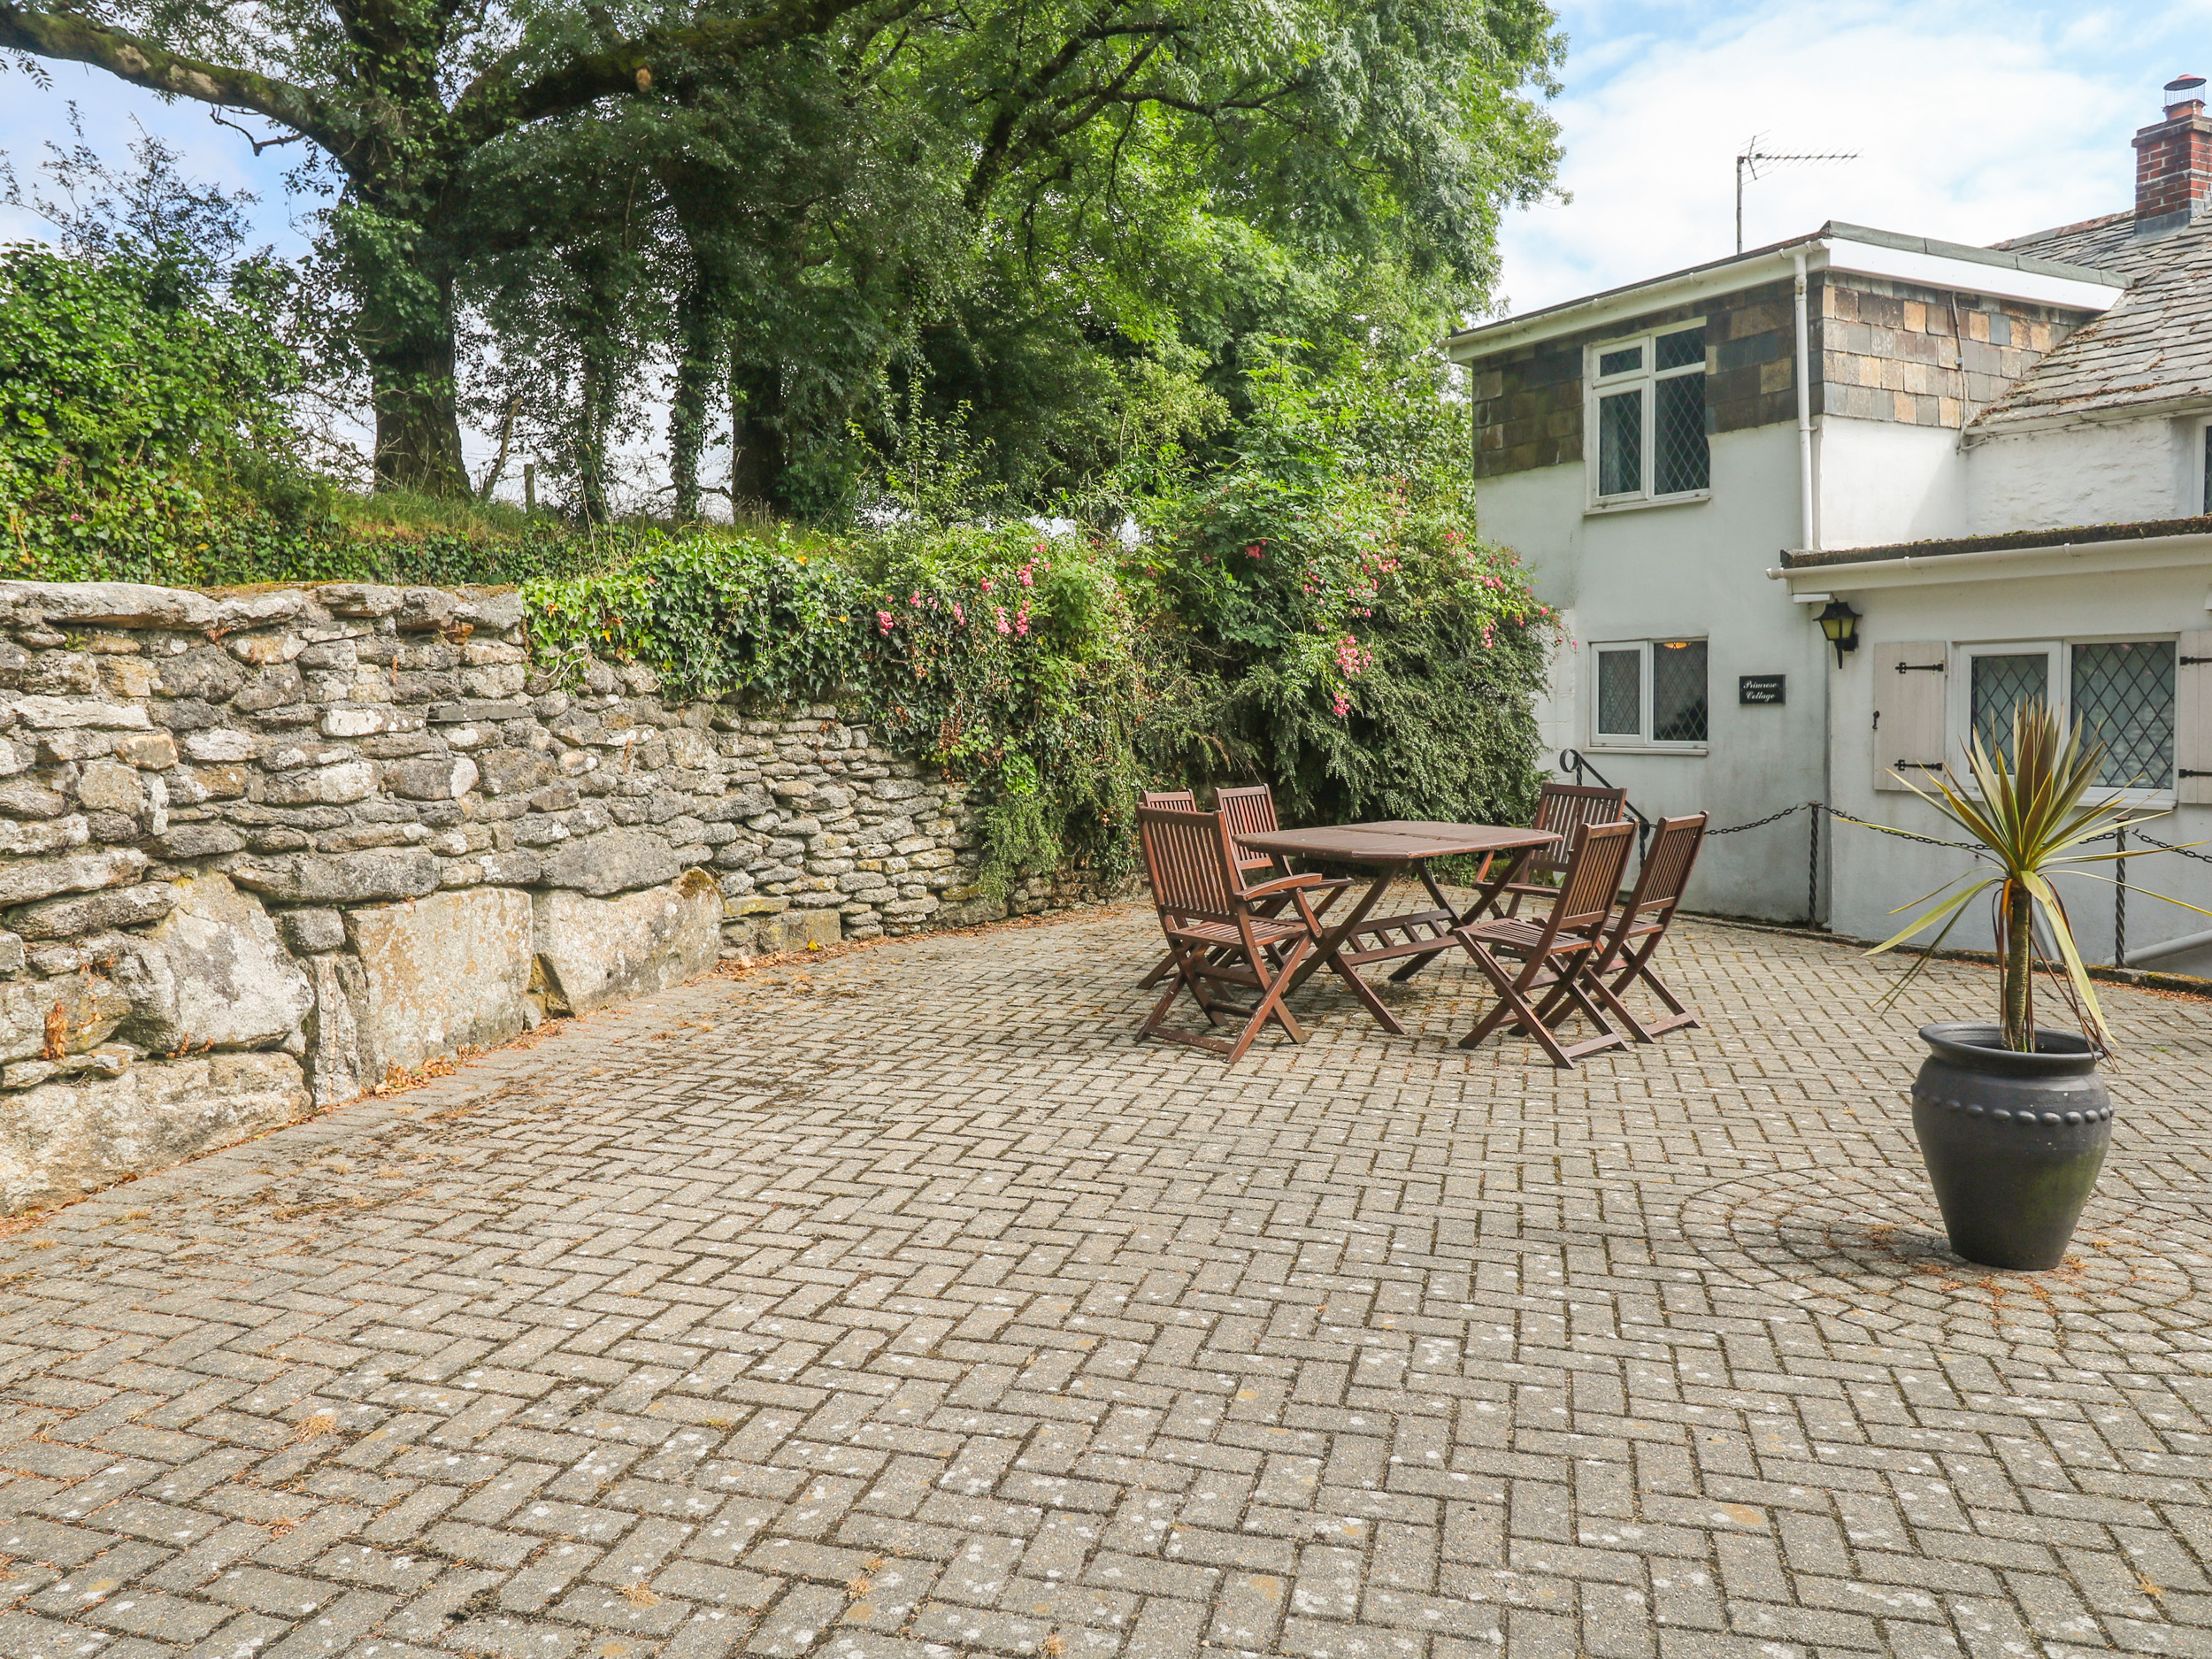 Primrose Cottage In Camelford This Delightful Stone Cottage